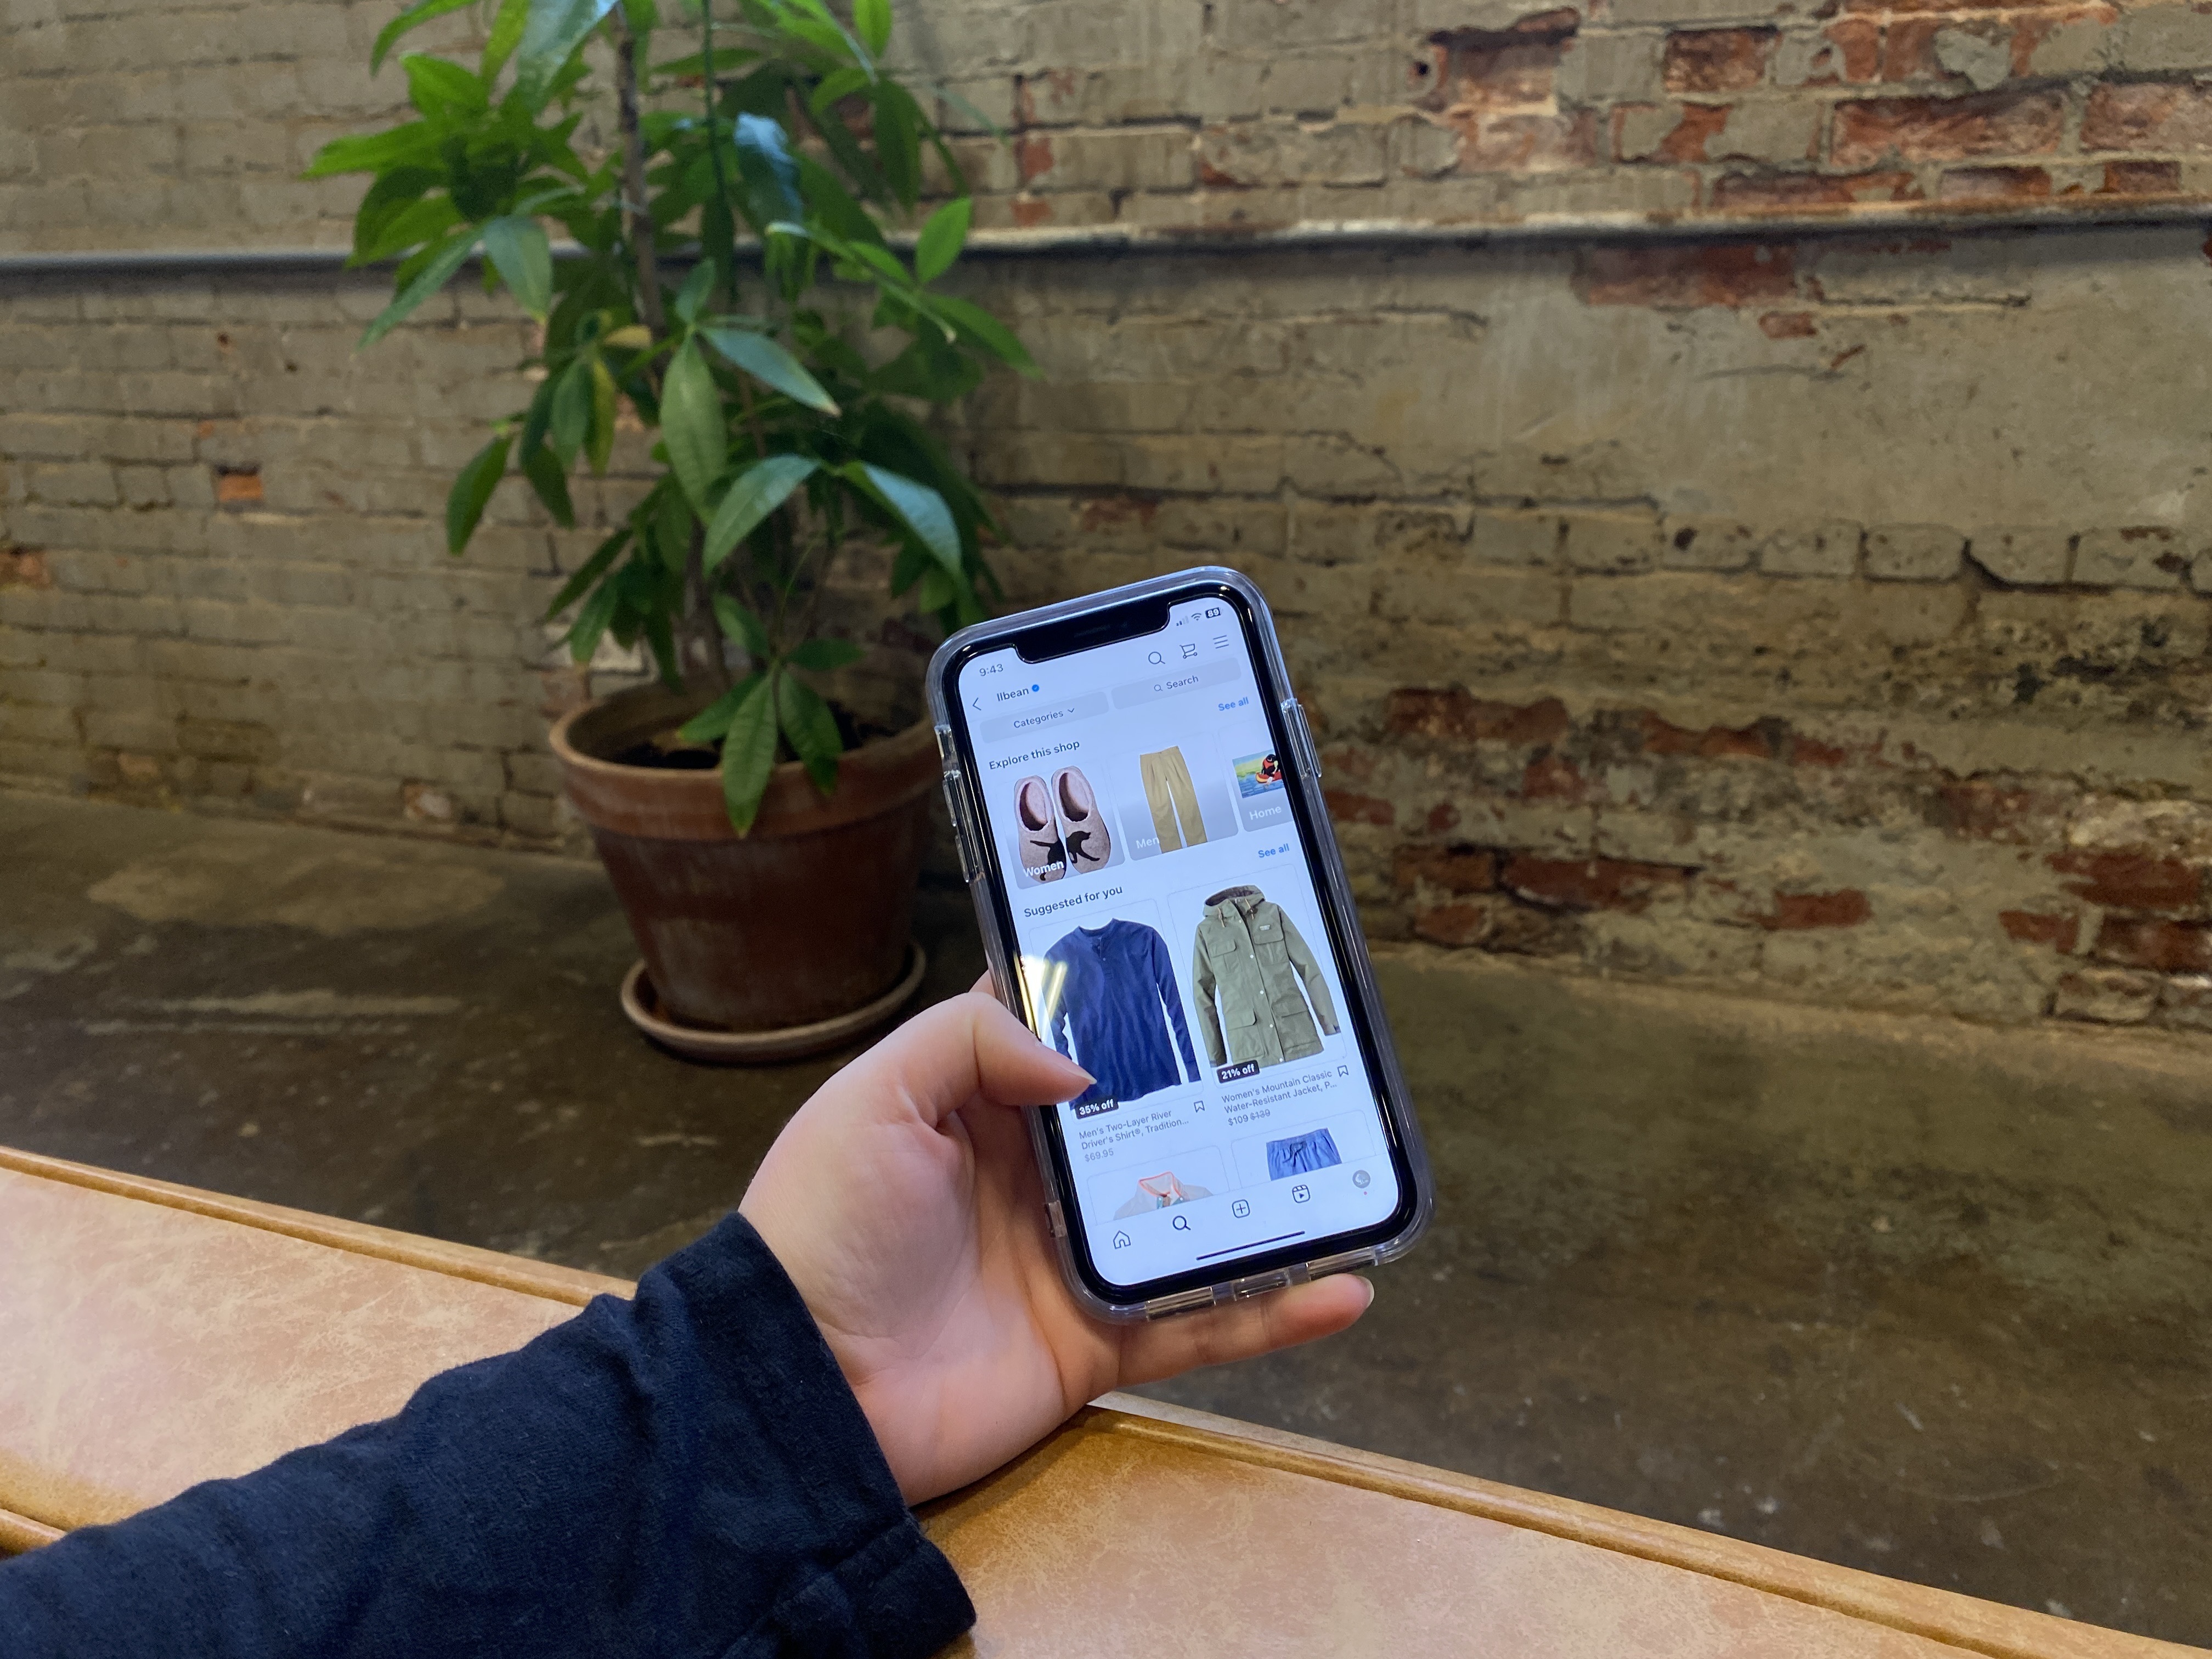 Instagram shop open on an iPhone, in front of a leafy plant and a brick wall.